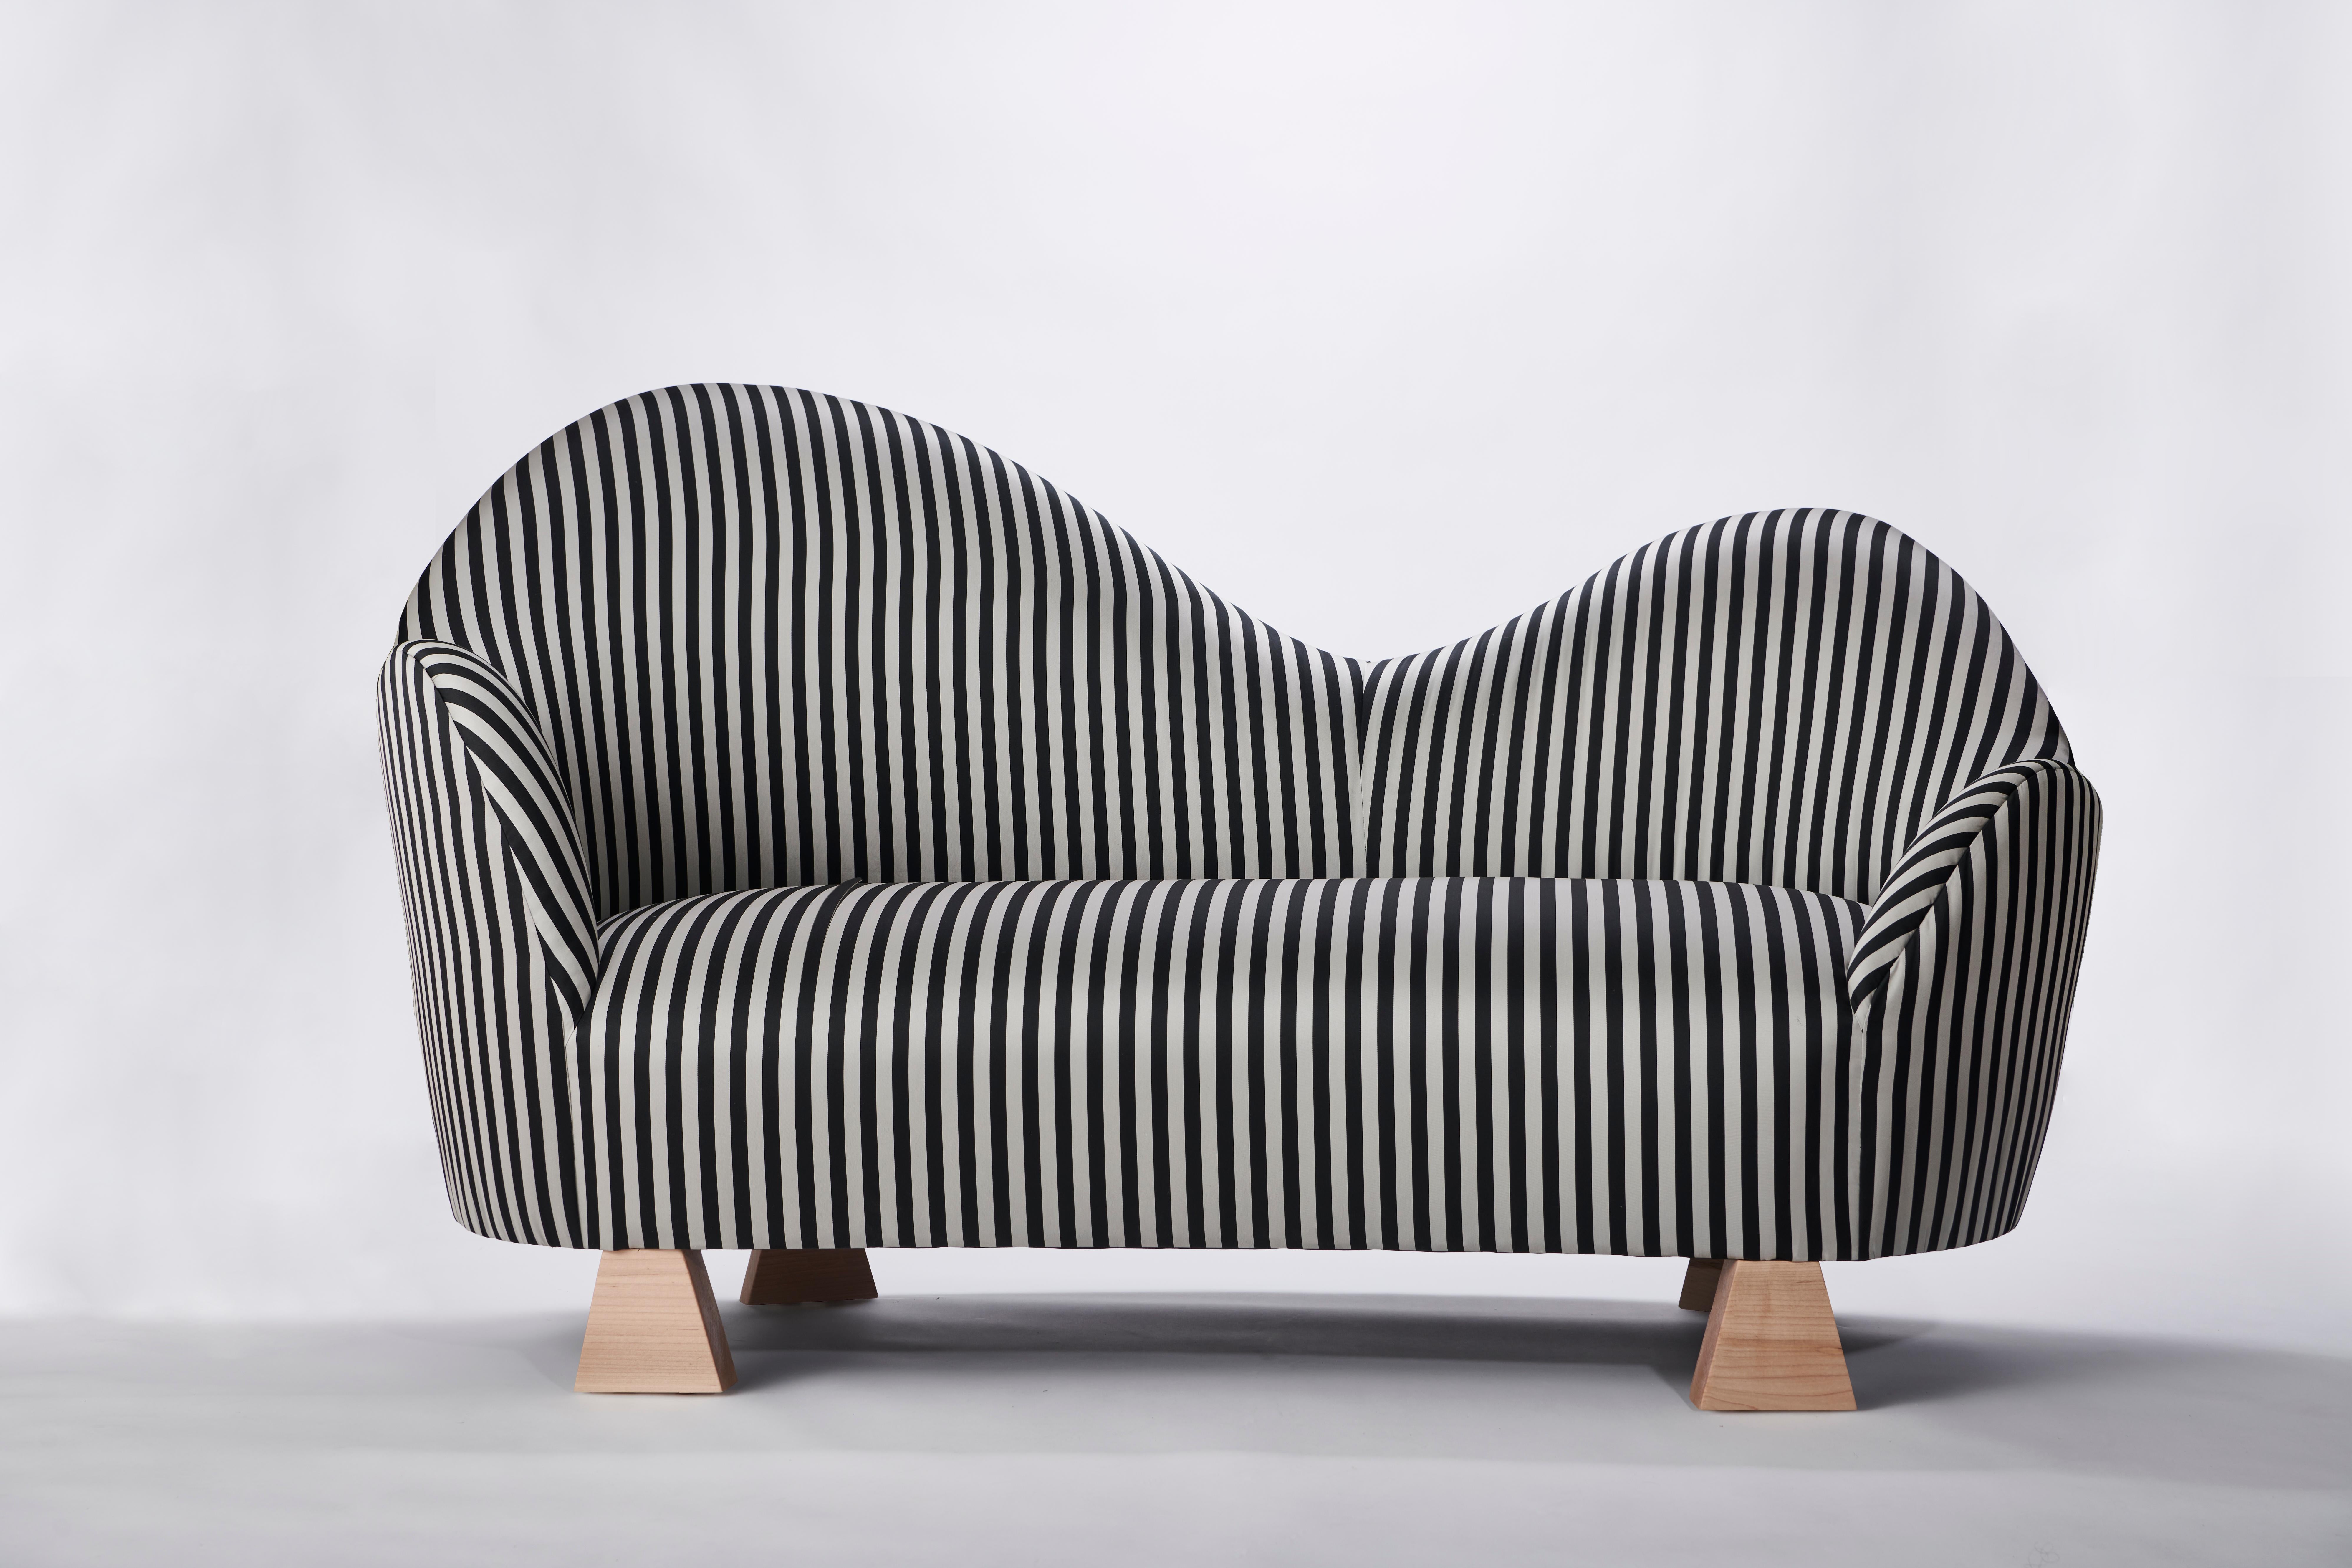 Made to order silk and wood settee designed by Christian Siriano.

Fabric: Black/grey stripe silk (available in custom fabric)
Base: Natural Maple (available in custom finish)
 
Dimensions: 
Overall Width: 64”
Overall Depth: 30” 
Overall Height: